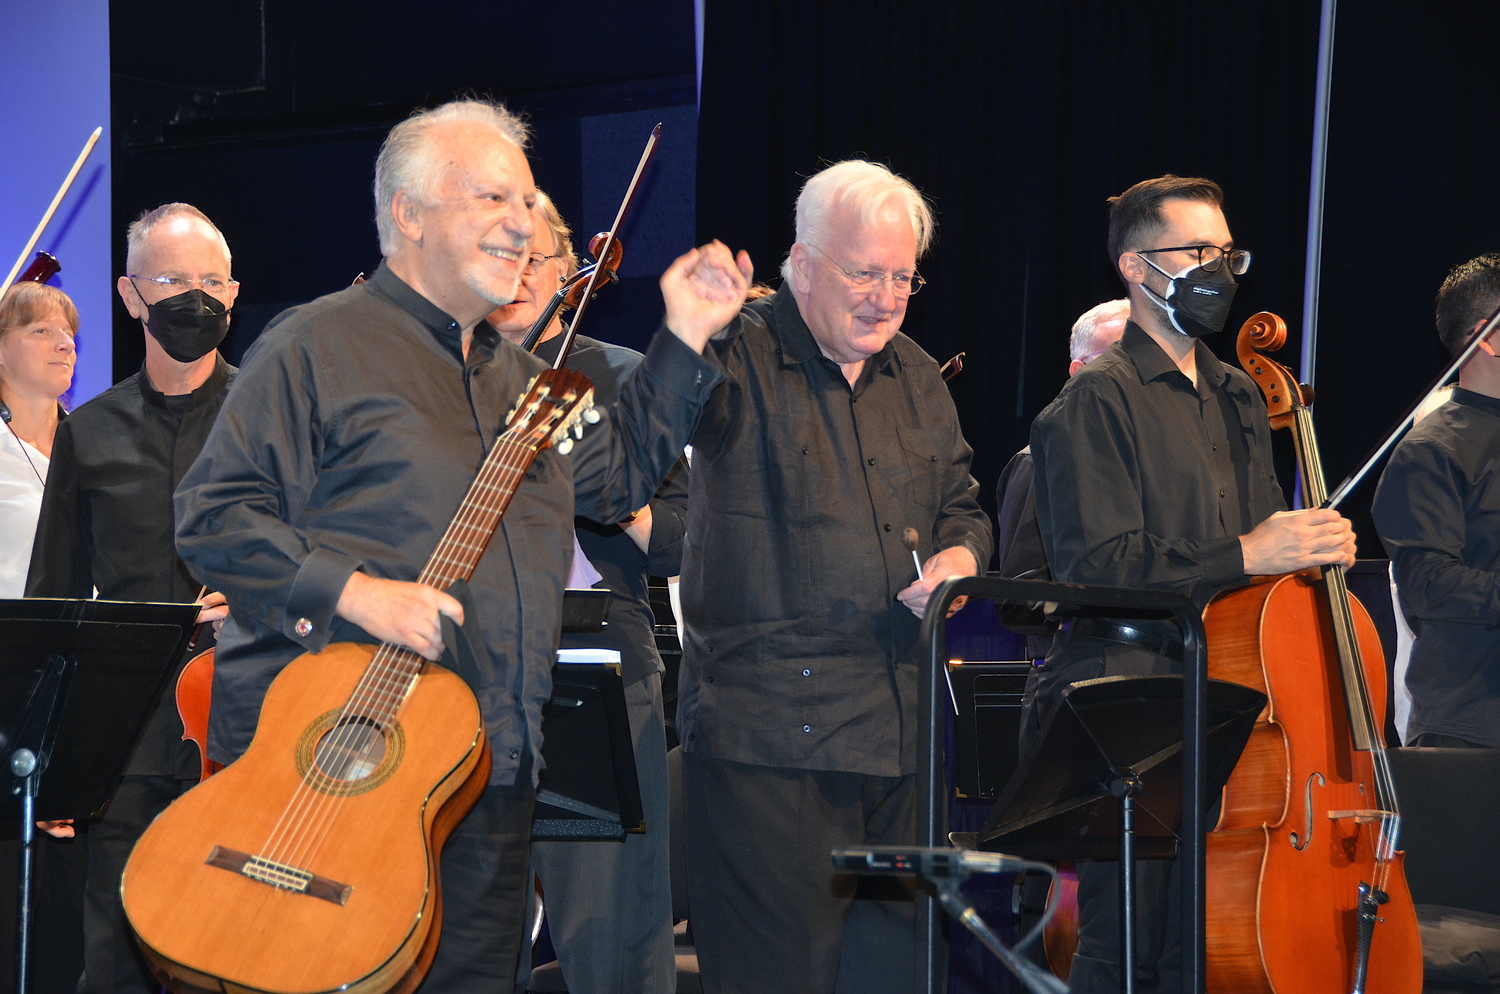 Classical guitarist Pepe Romero and Maestro Michael Palmer take a bow during a TH·FM concert at LTV Studios in September 2022. BARRY GORDIN